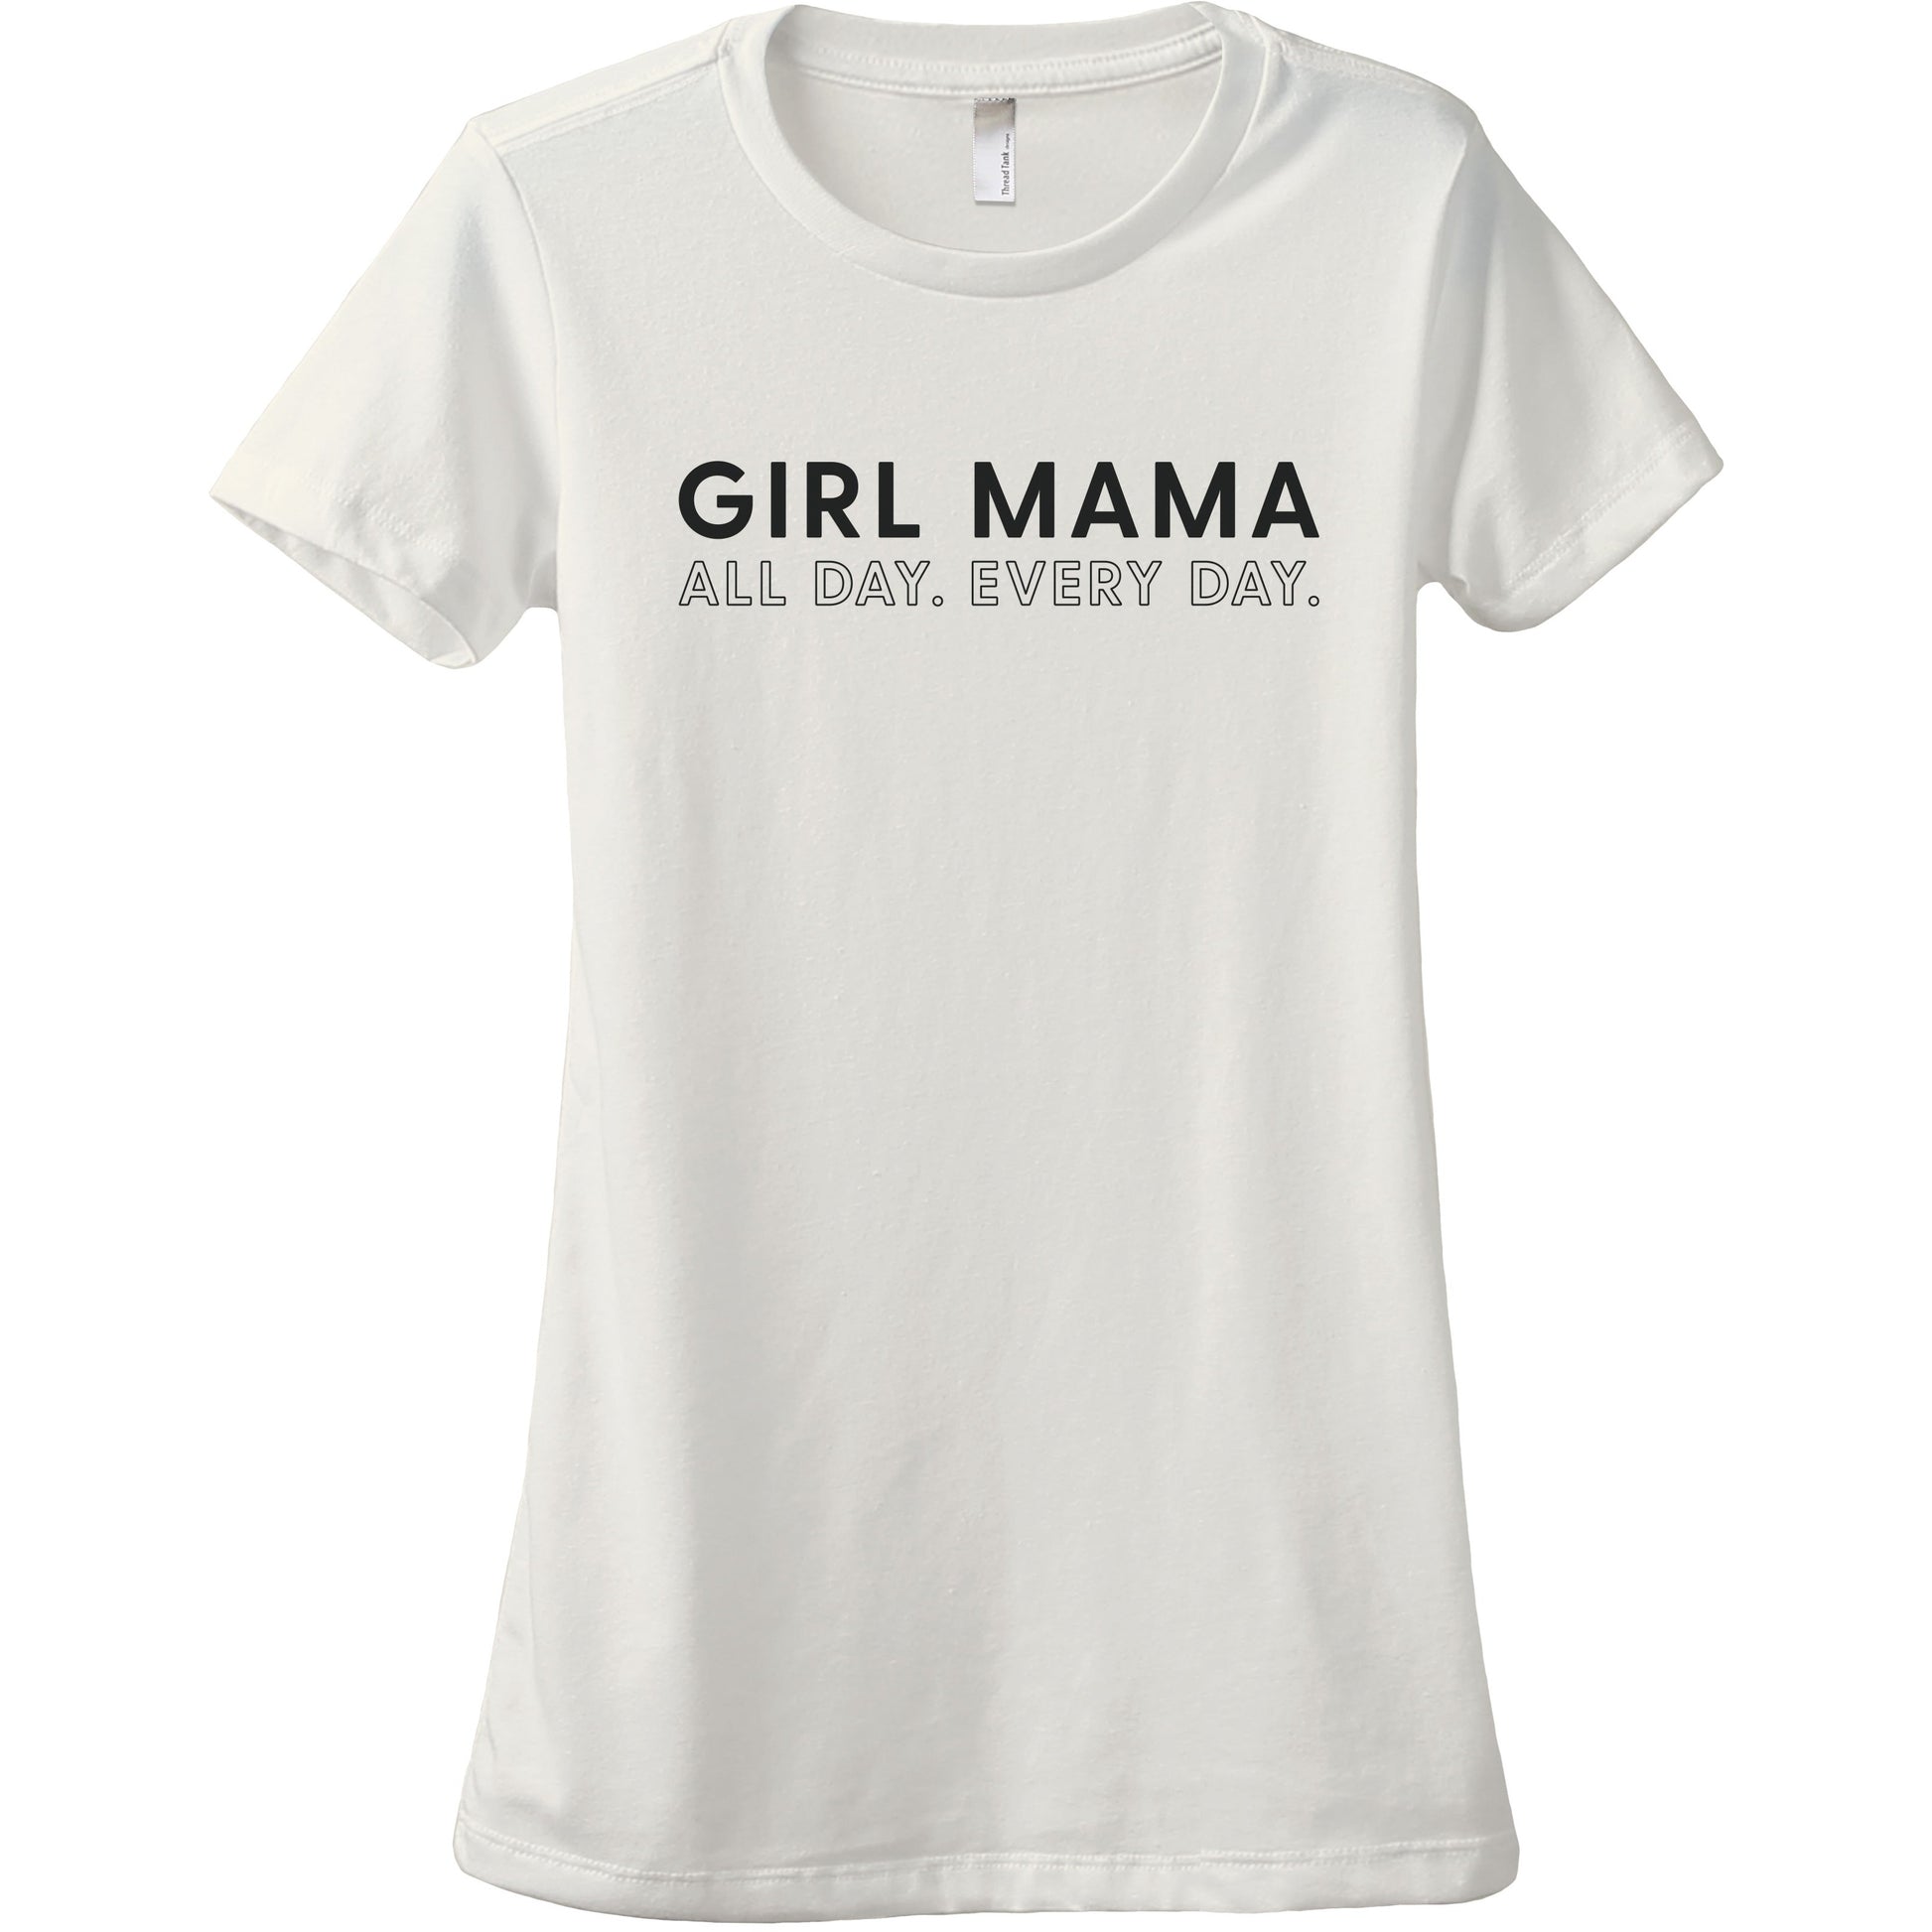 Girl Mama All Day Every Day Women's Relaxed Crewneck T-Shirt Top Tee Vintage White